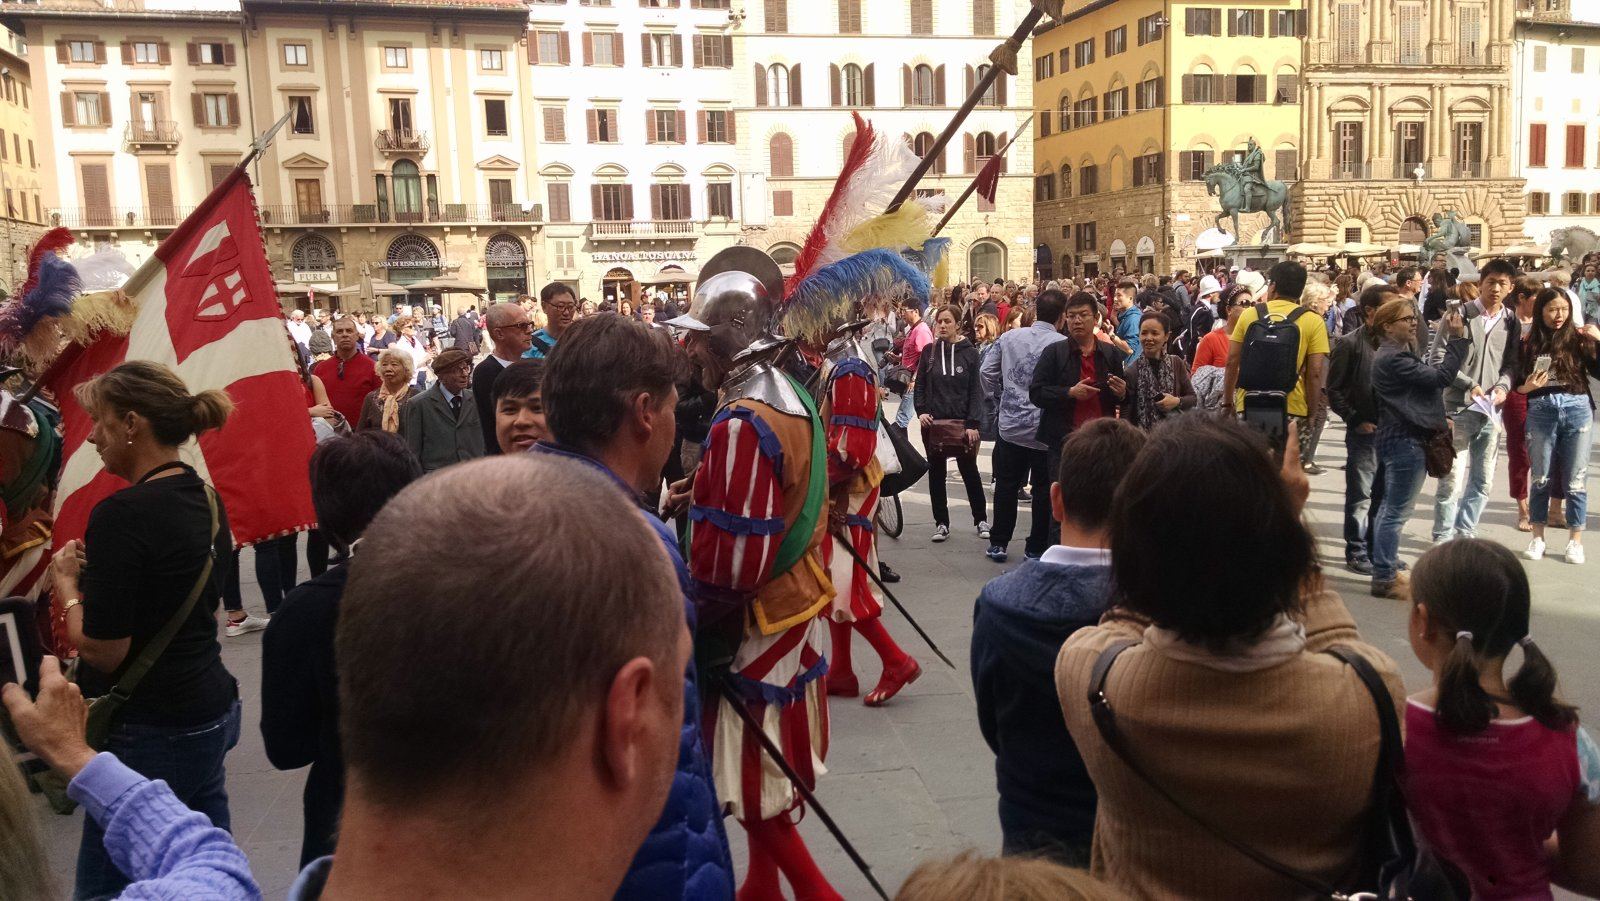 The ceremony taking place by the statue area near the Uffizi.